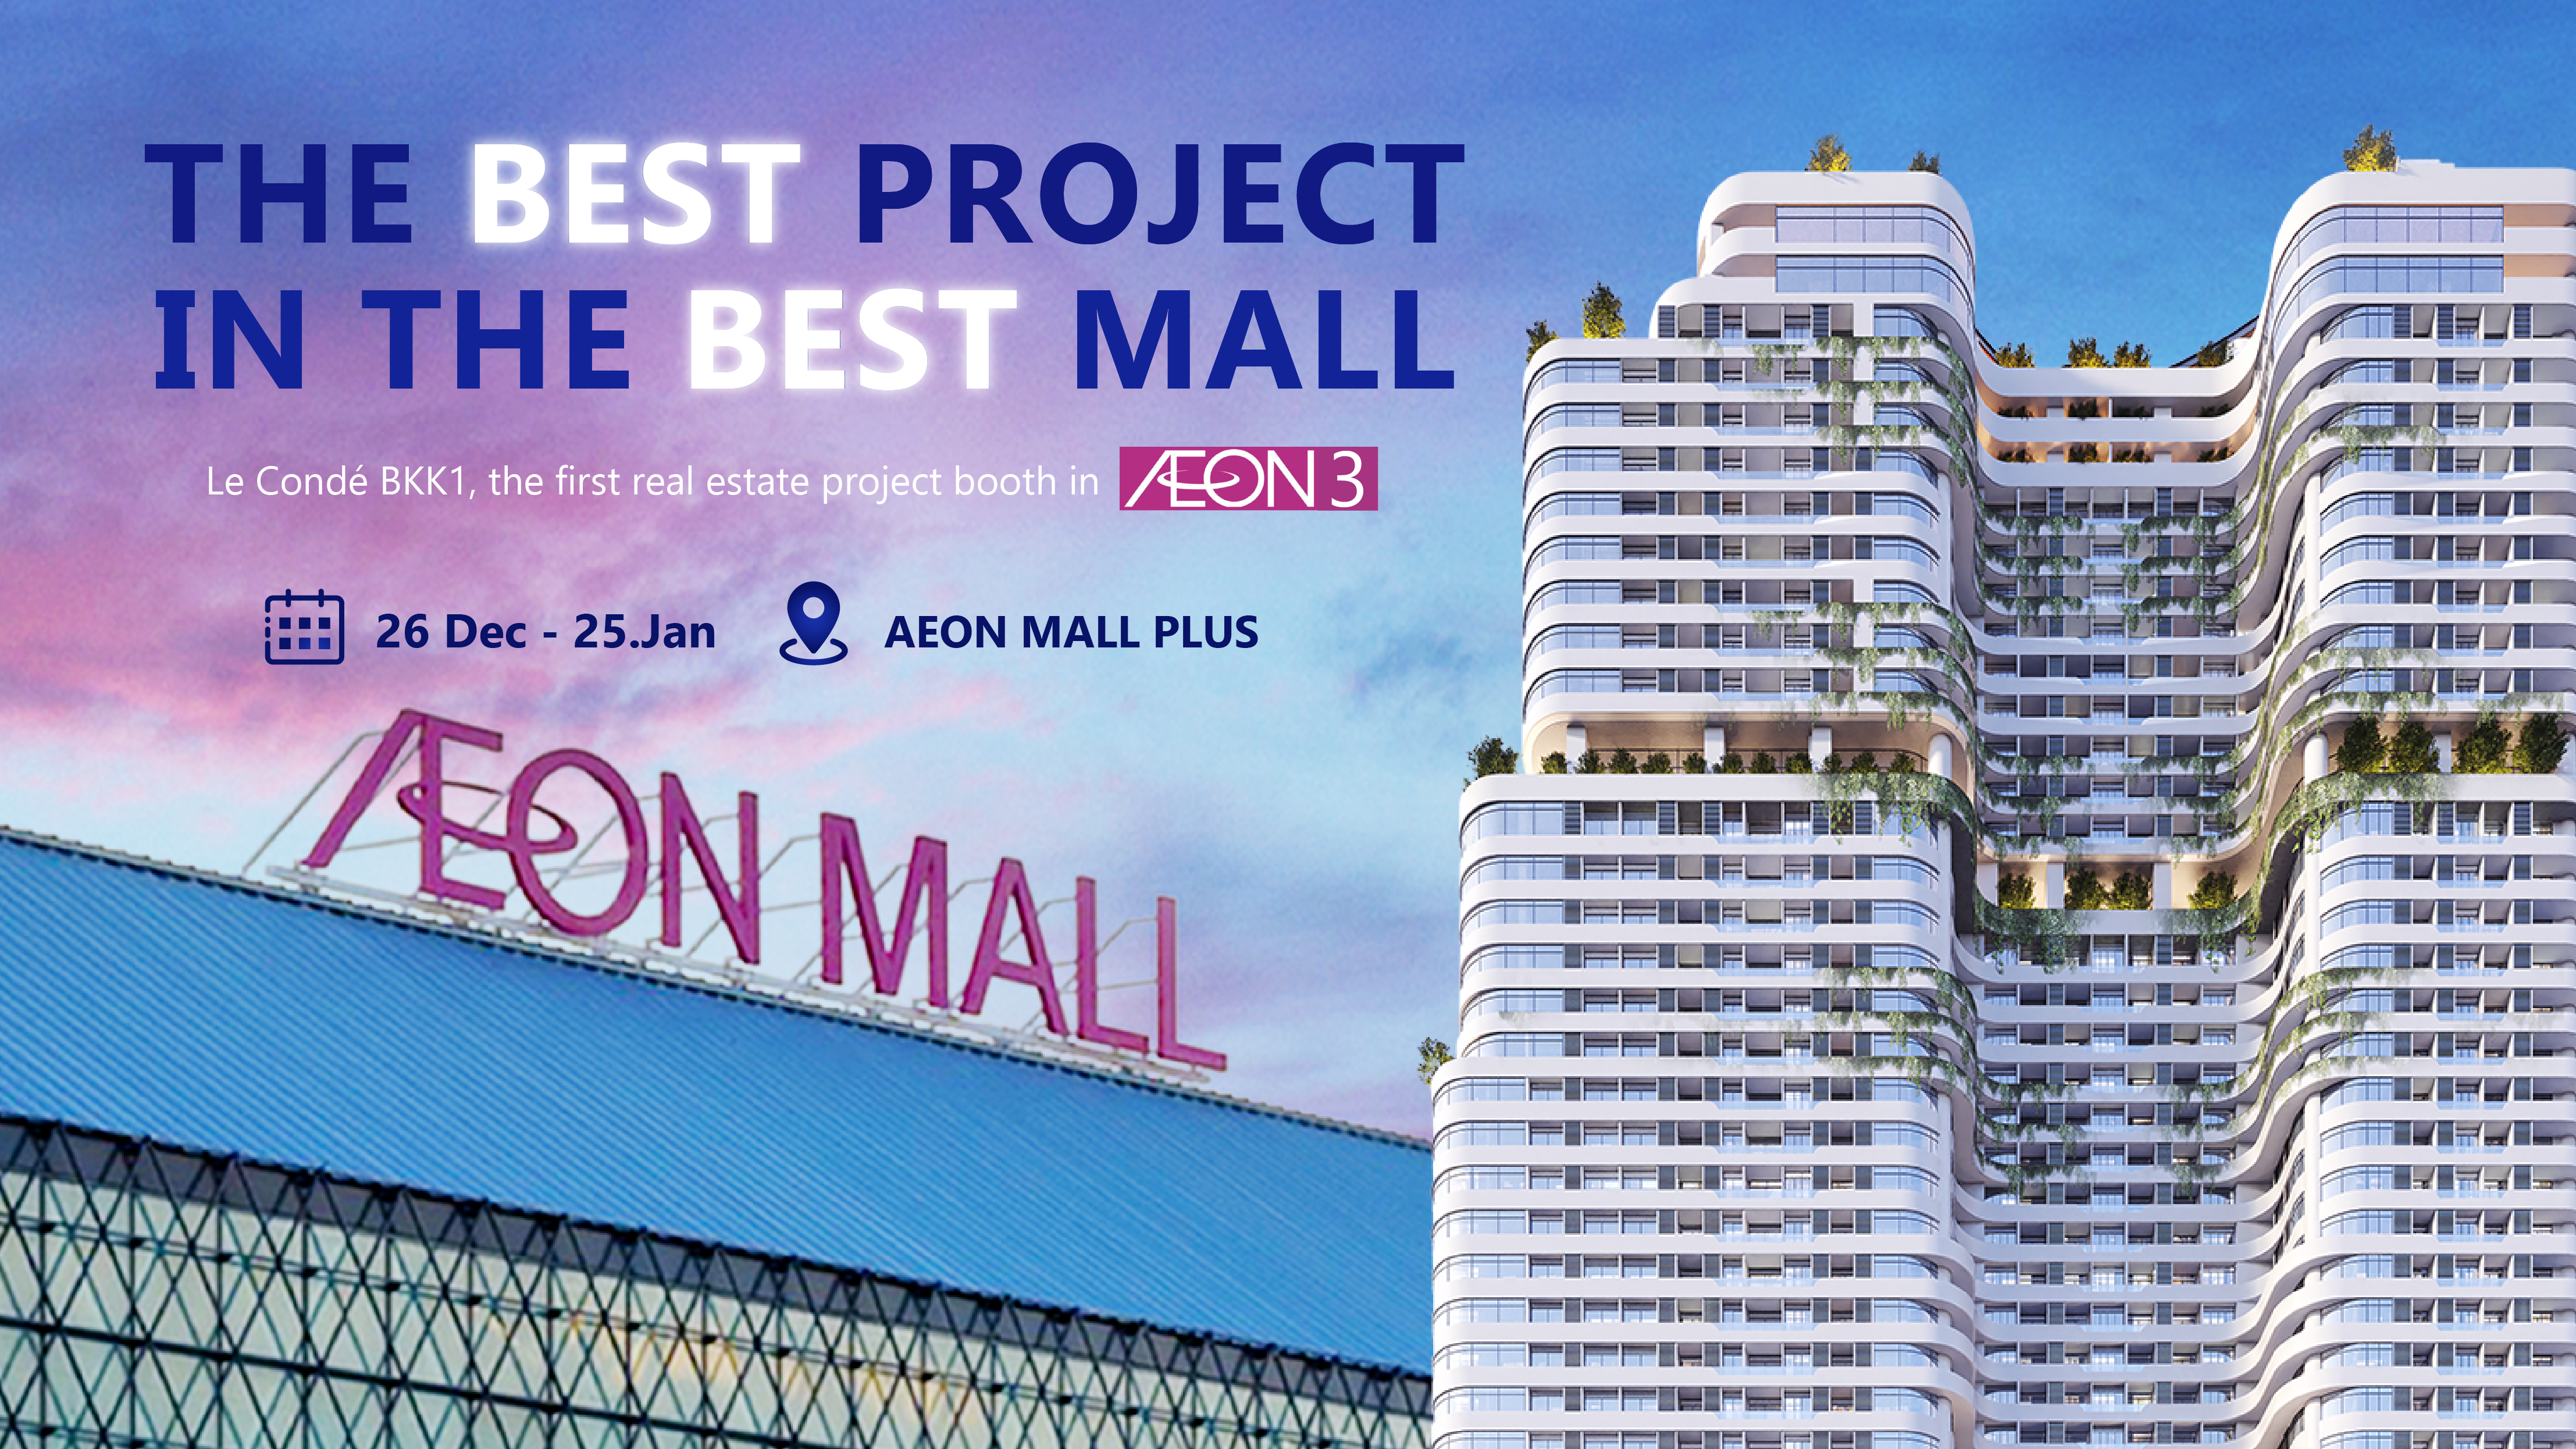 NUMBER 1 AGAIN! The anticipation of AEON III’s first real-estate project exhibition is finally revealed!